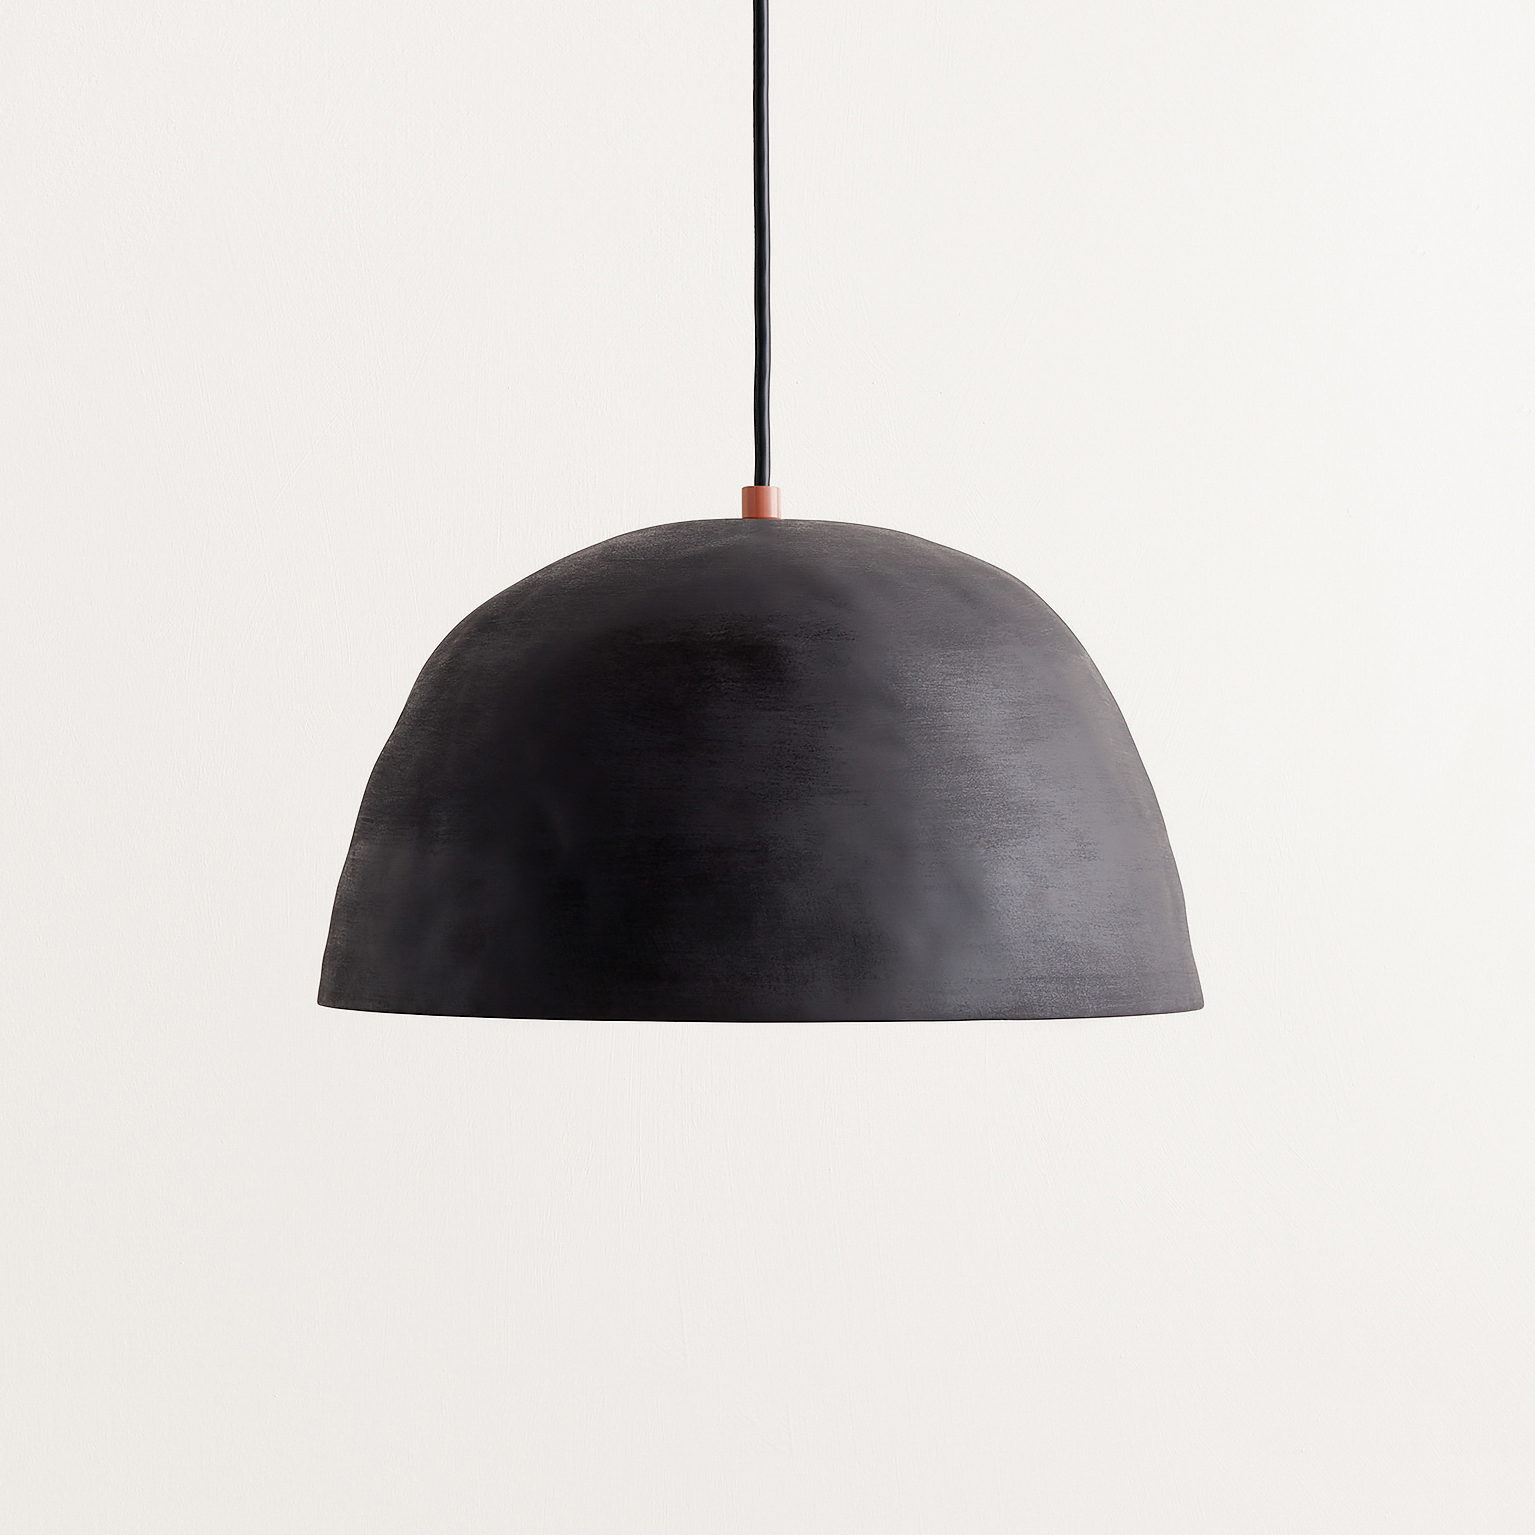 Ceramic Dome Pendant by in common with